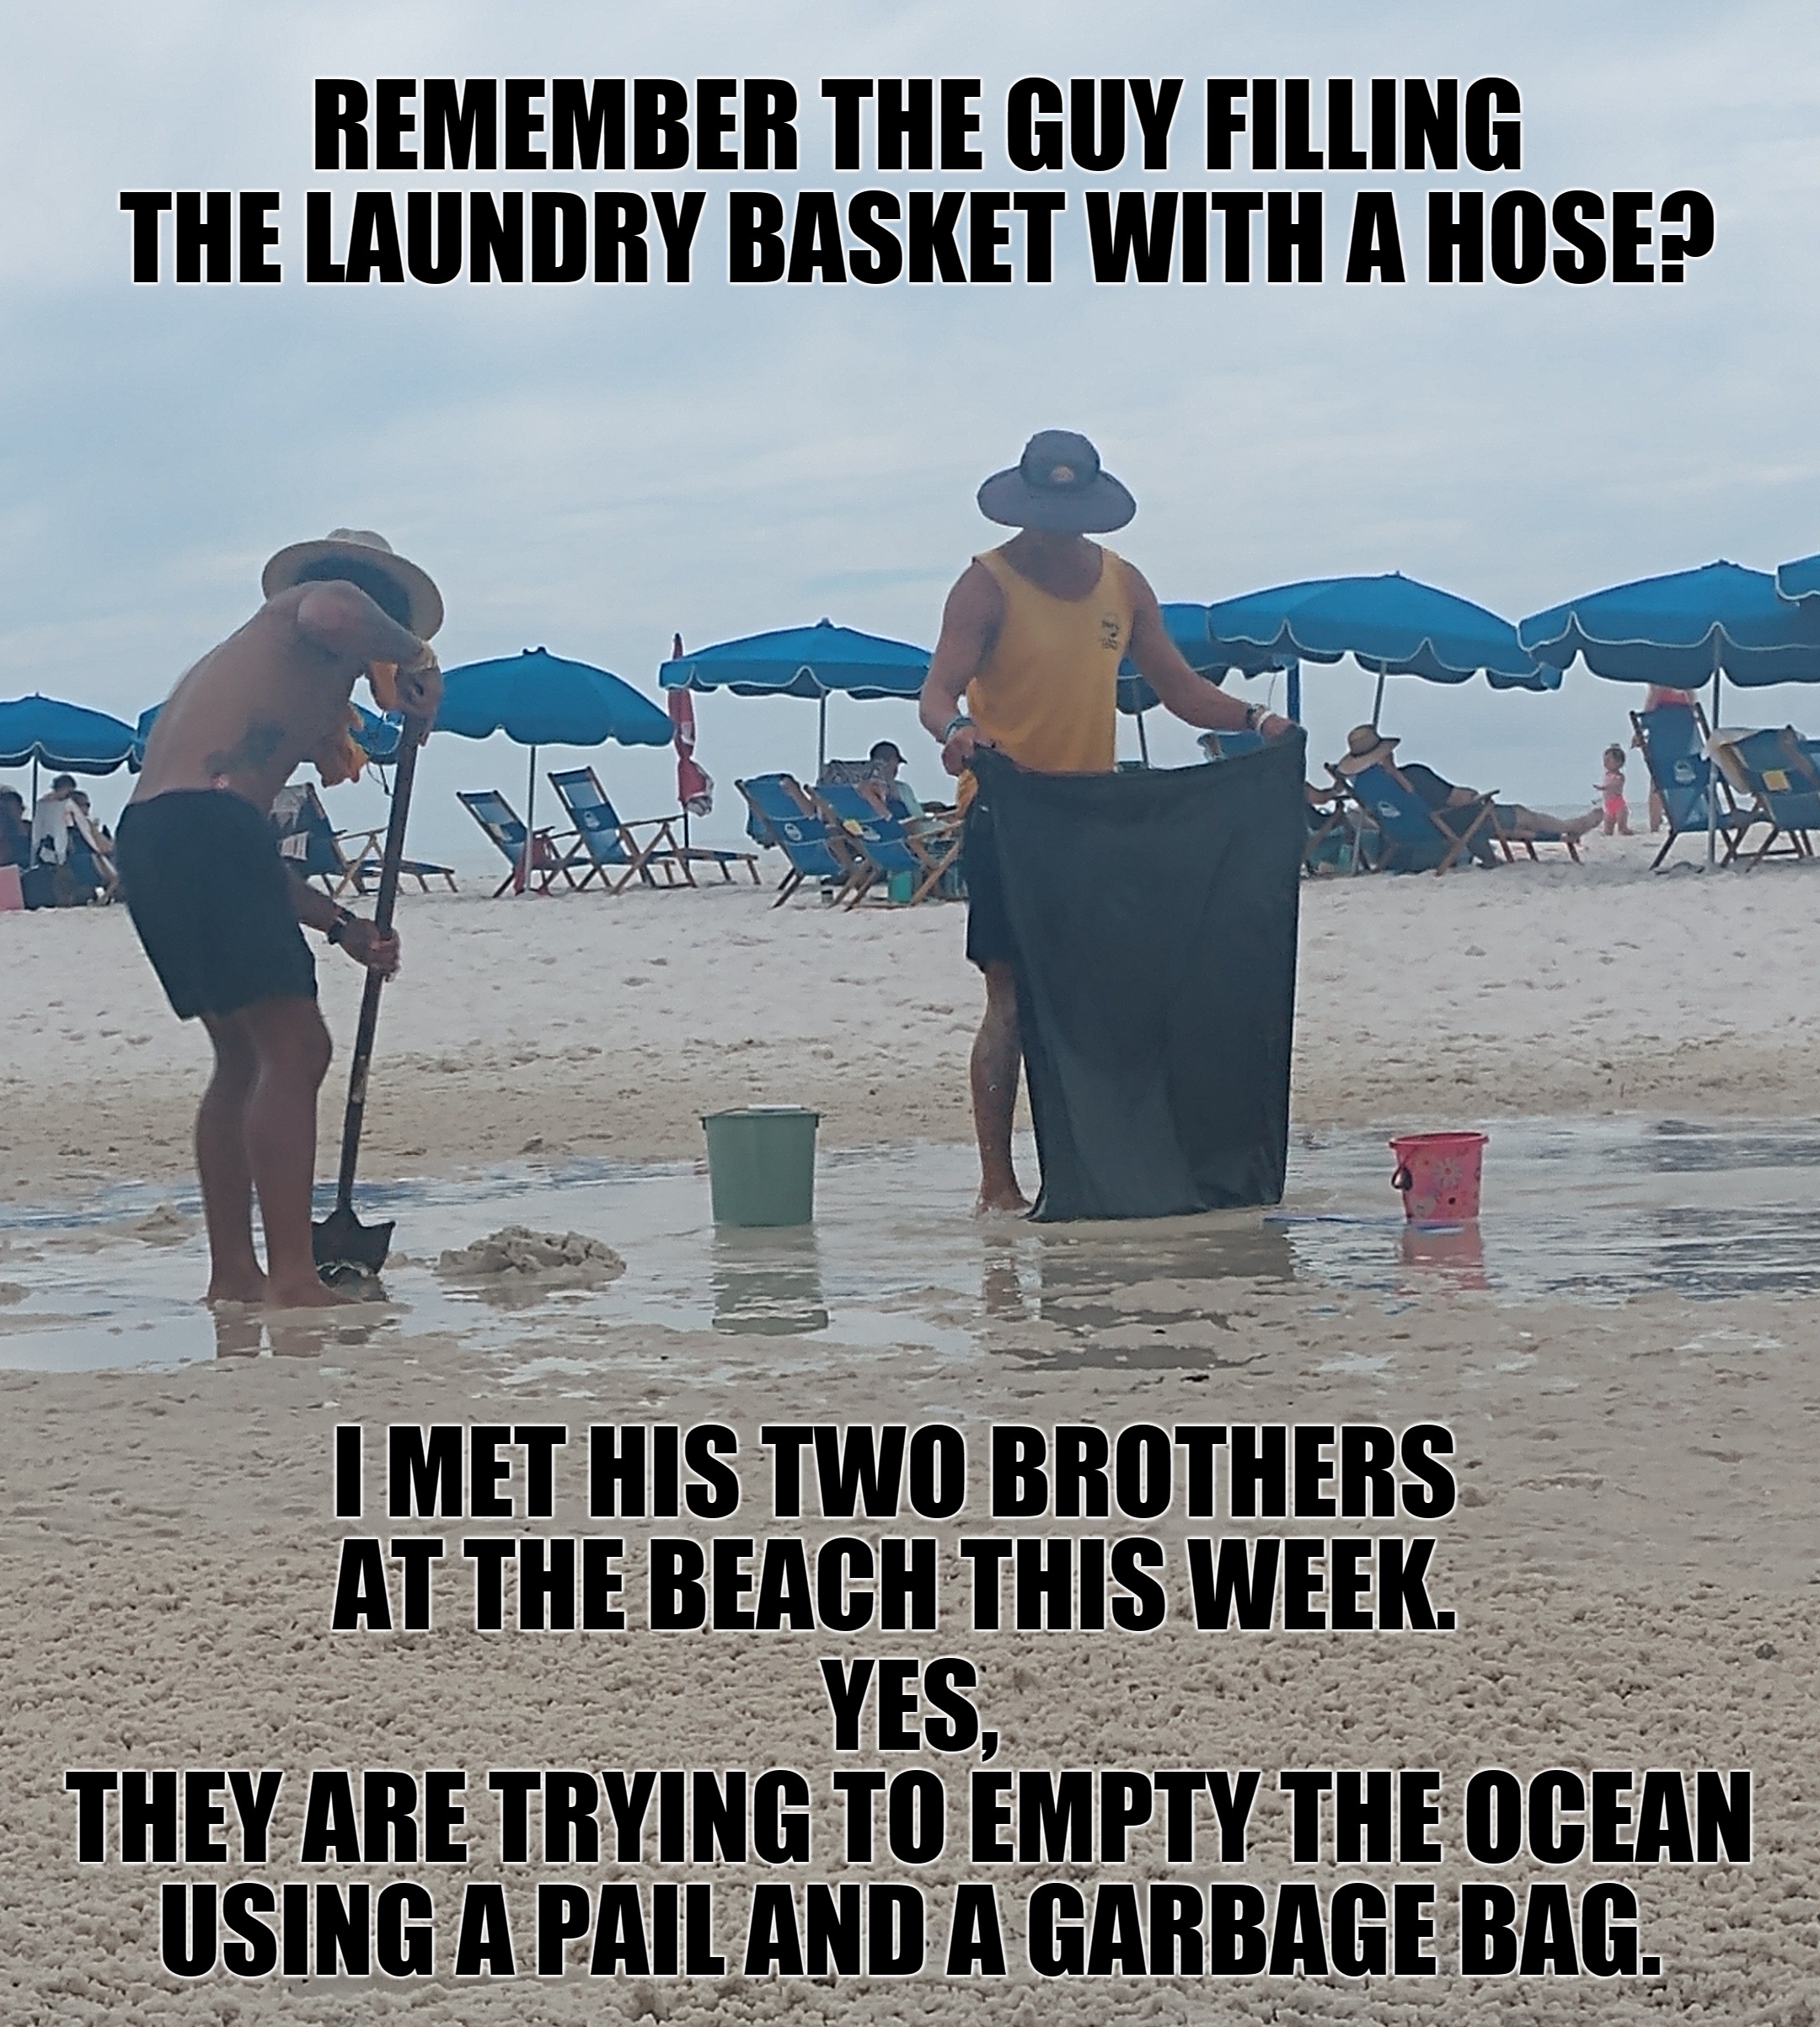 Emptying the Ocean |  REMEMBER THE GUY FILLING THE LAUNDRY BASKET WITH A HOSE? I MET HIS TWO BROTHERS AT THE BEACH THIS WEEK. YES,
THEY ARE TRYING TO EMPTY THE OCEAN
USING A PAIL AND A GARBAGE BAG. | image tagged in beach | made w/ Imgflip meme maker